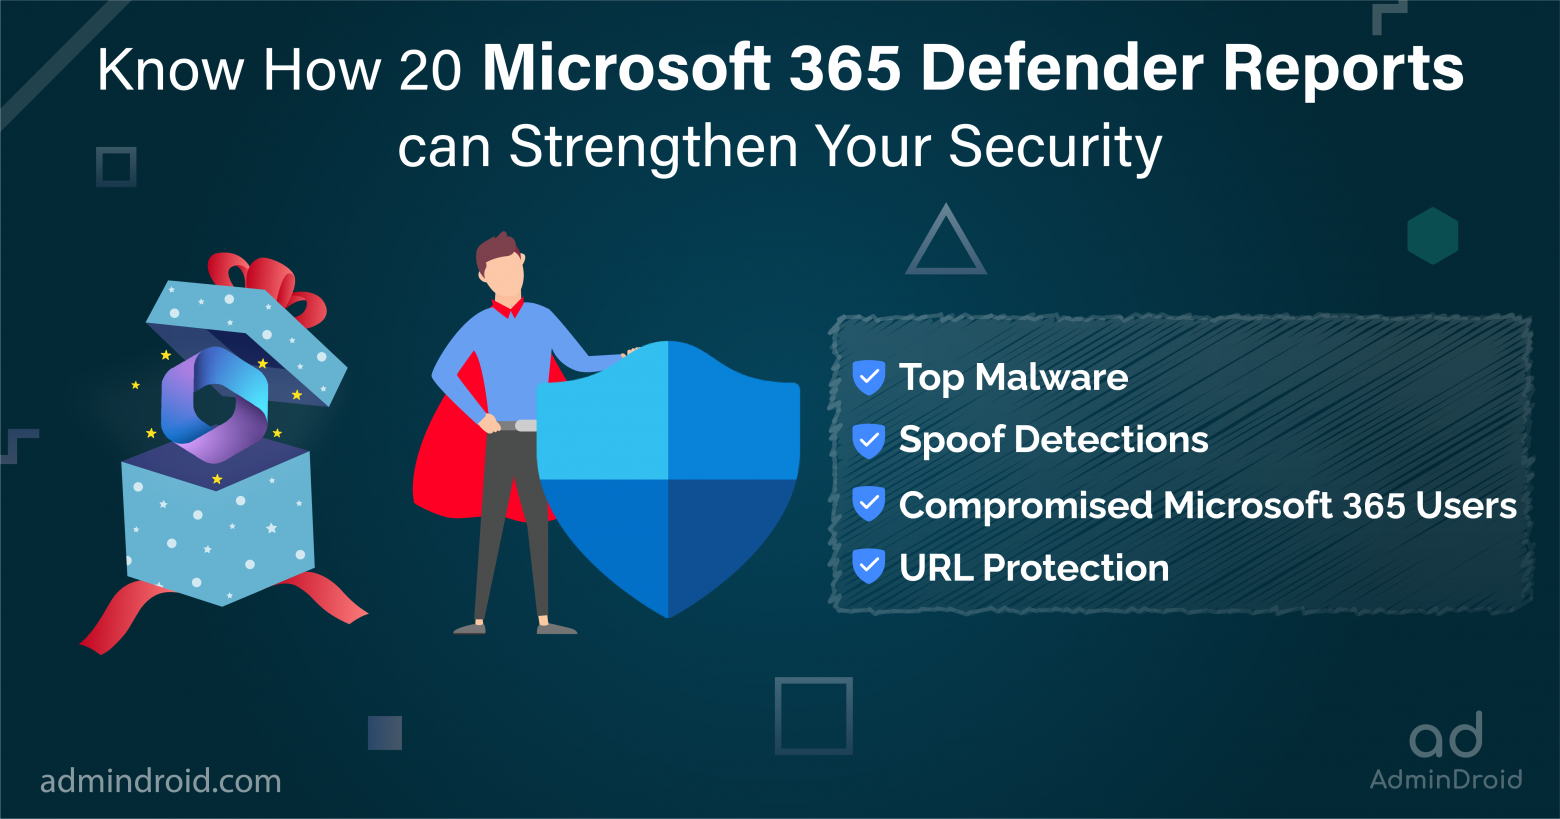 Know How 20 Microsoft 365 Defender Reports can Strengthen Your Security